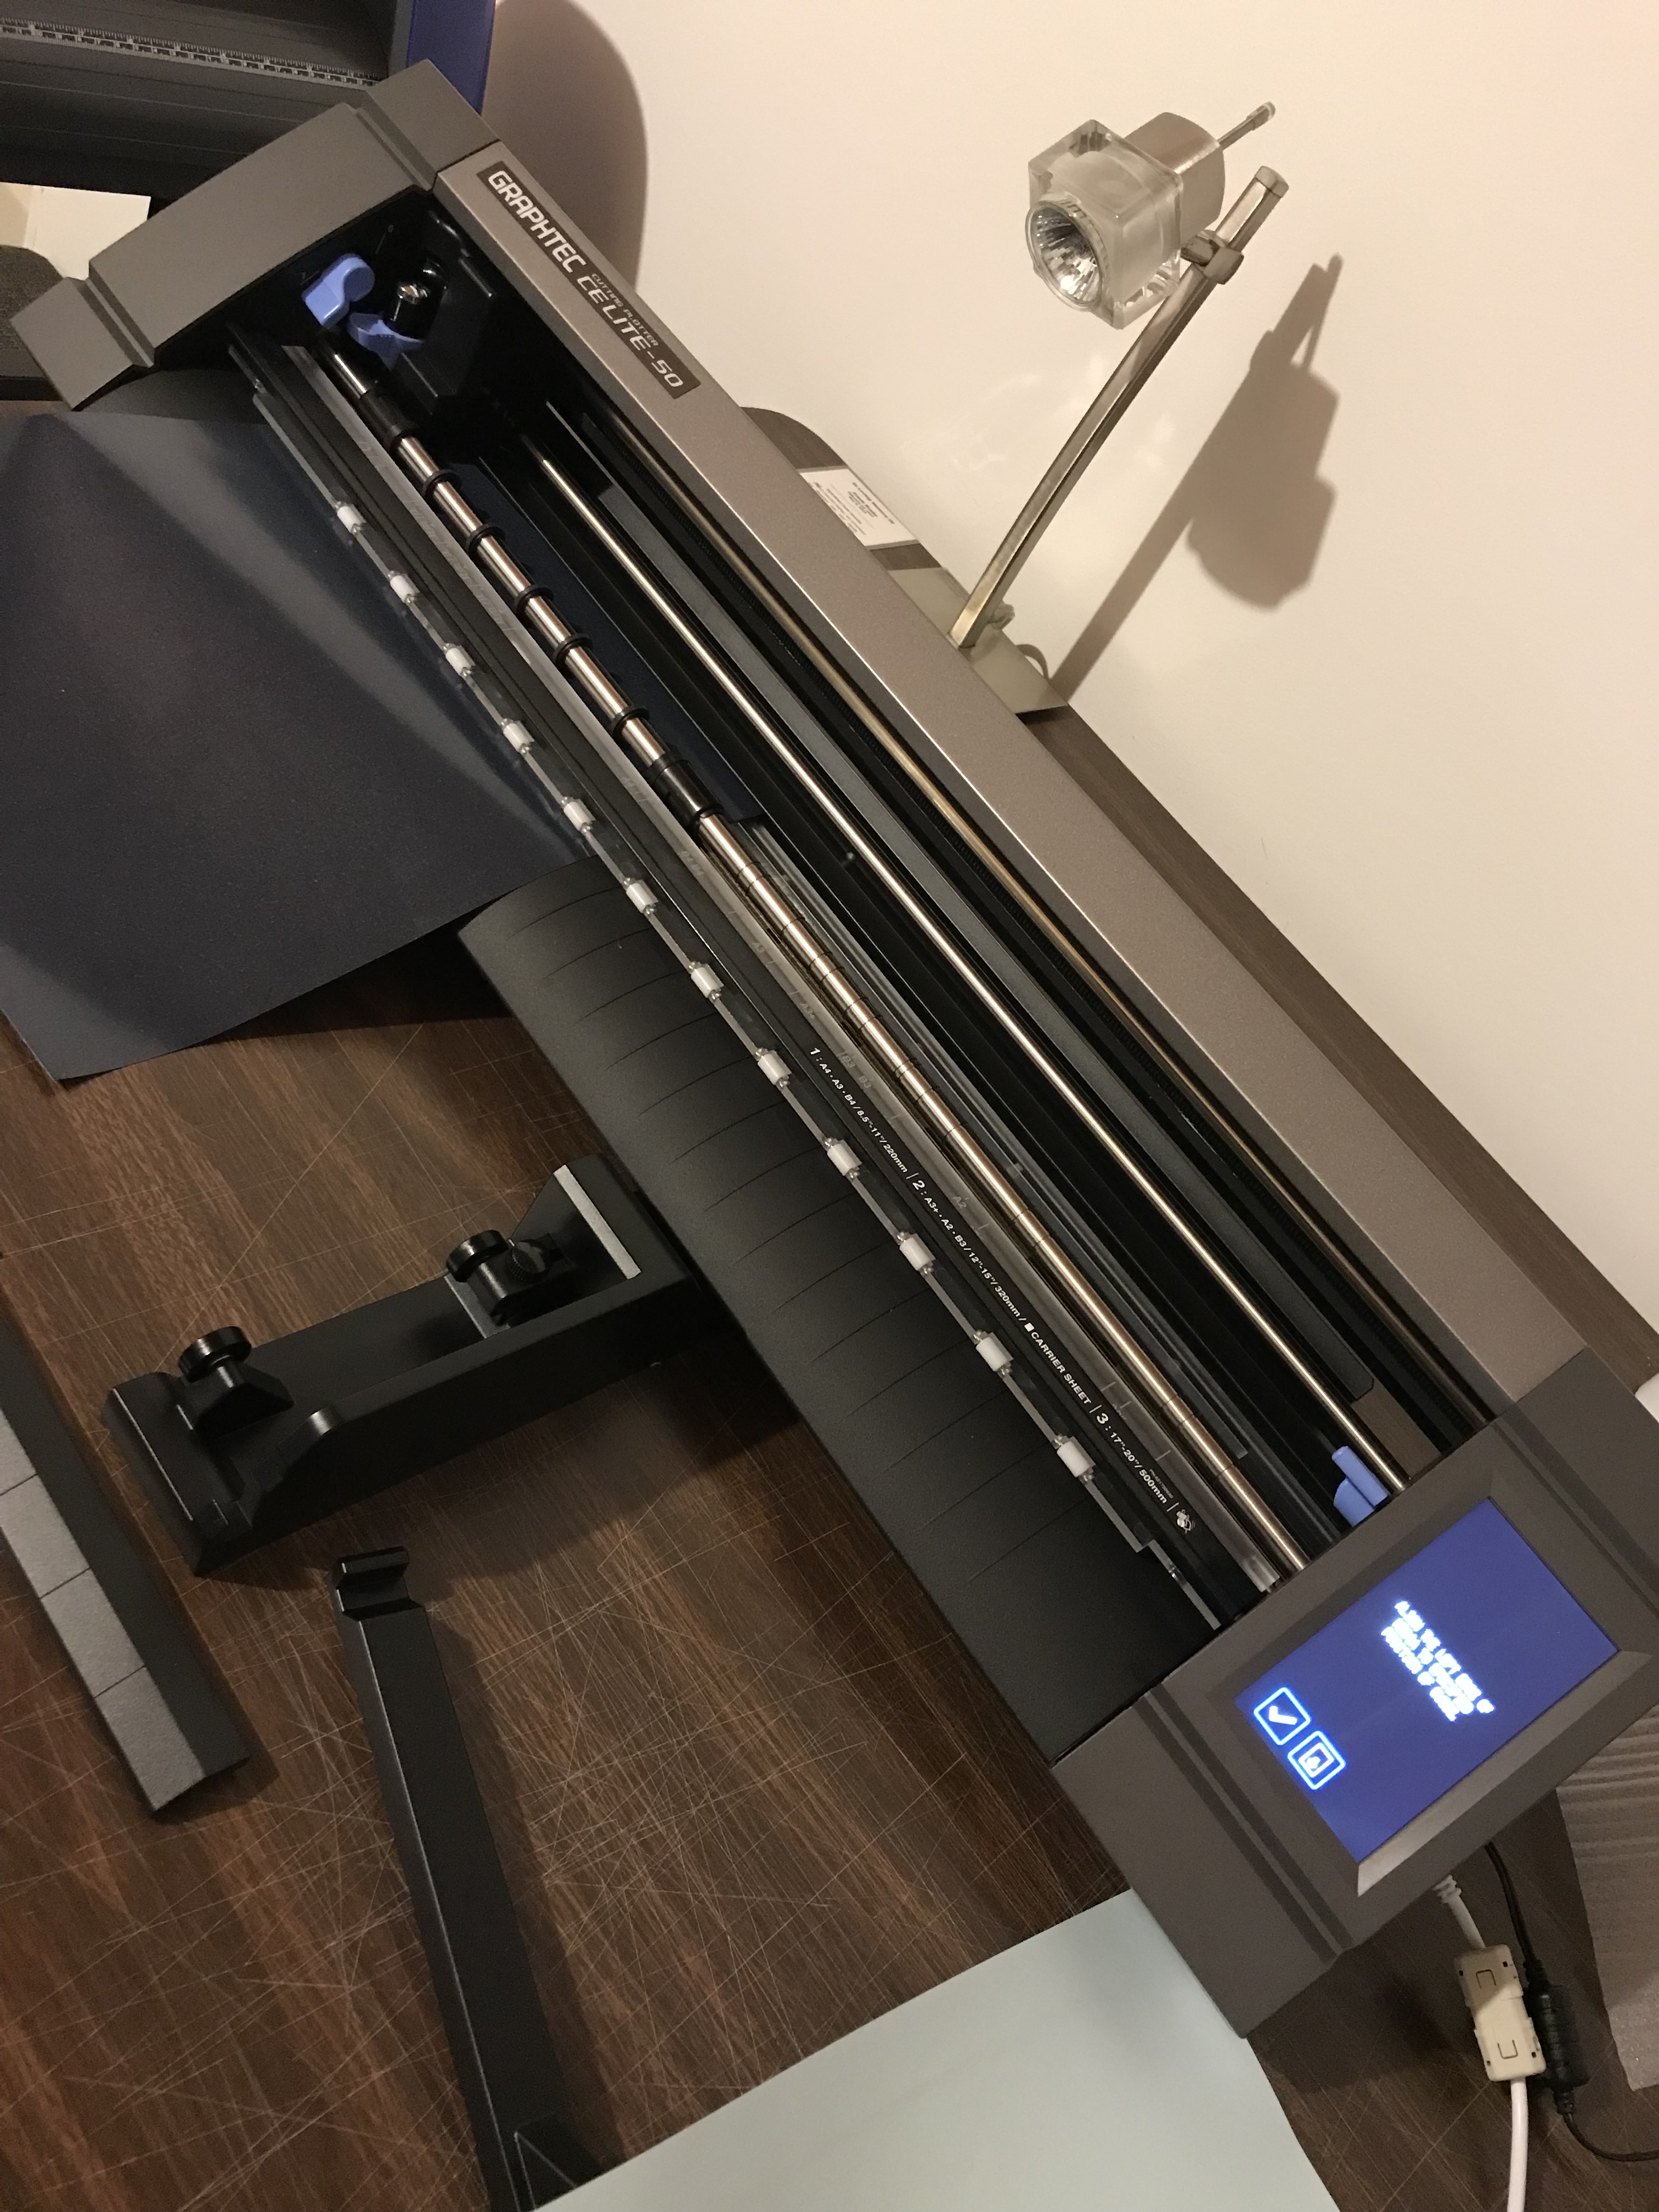 Help with CE-Lite 50 - GraphTec Cutting Plotter Discussion